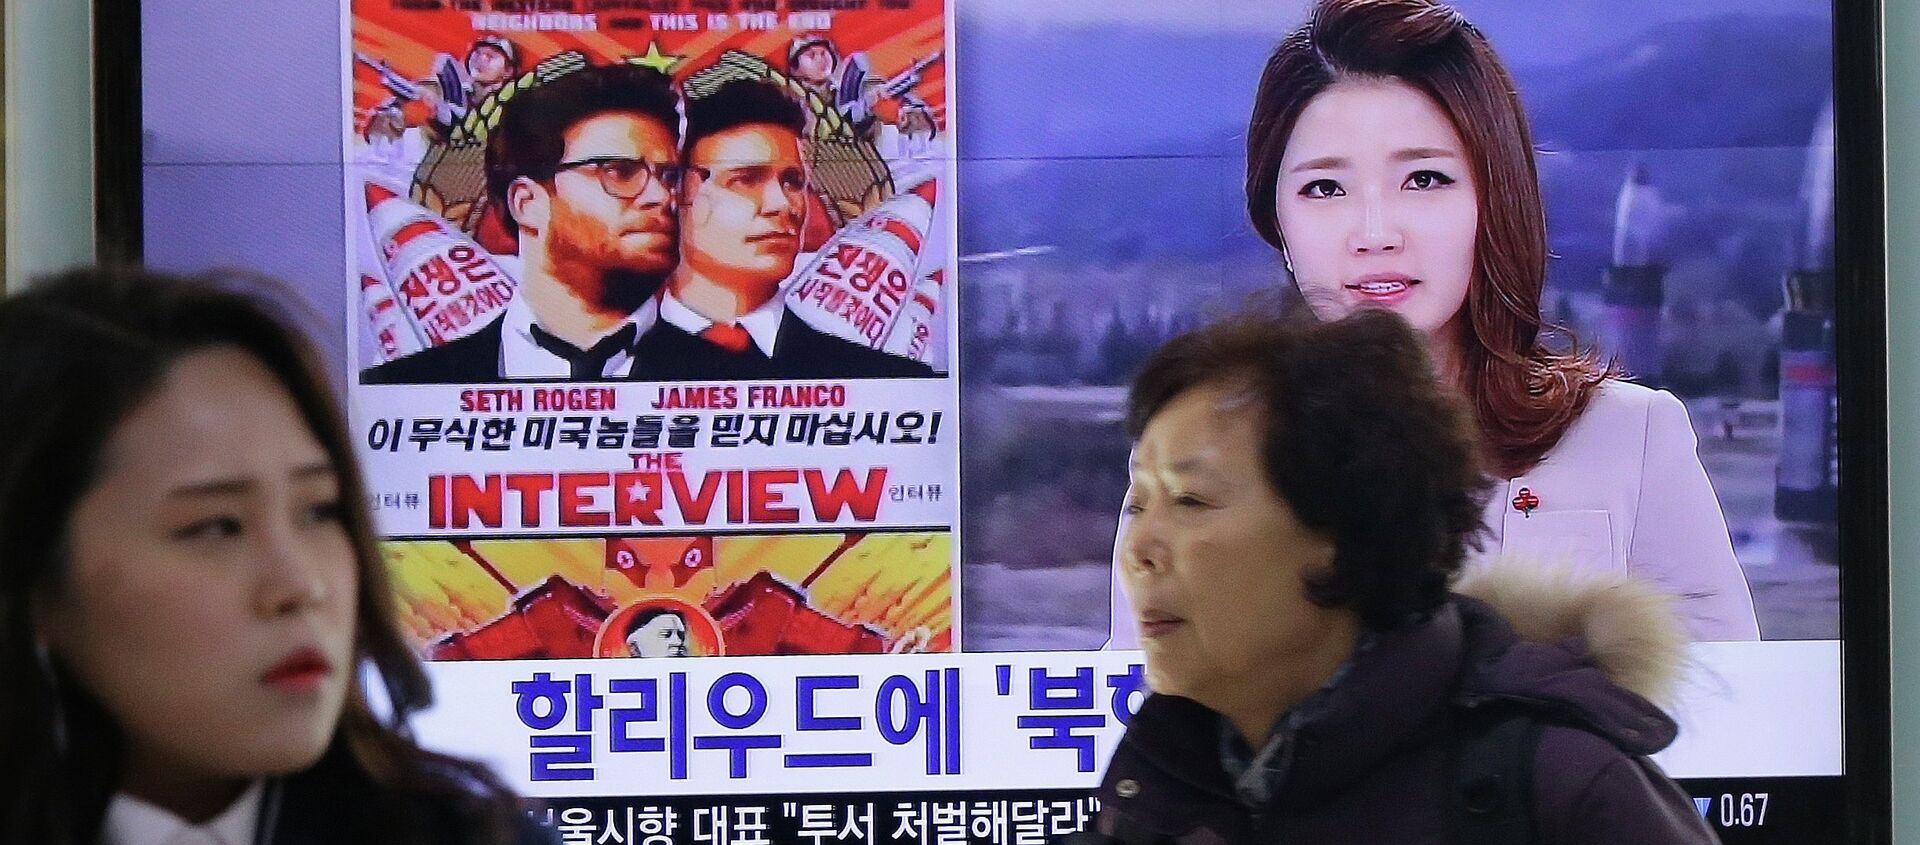 People walk past a TV screen showing a poster of Sony Picture's The Interview in a news report, at the Seoul Railway Station in Seoul, South Korea, Monday, Dec. 22, 2014 - Sputnik Türkiye, 1920, 06.09.2018